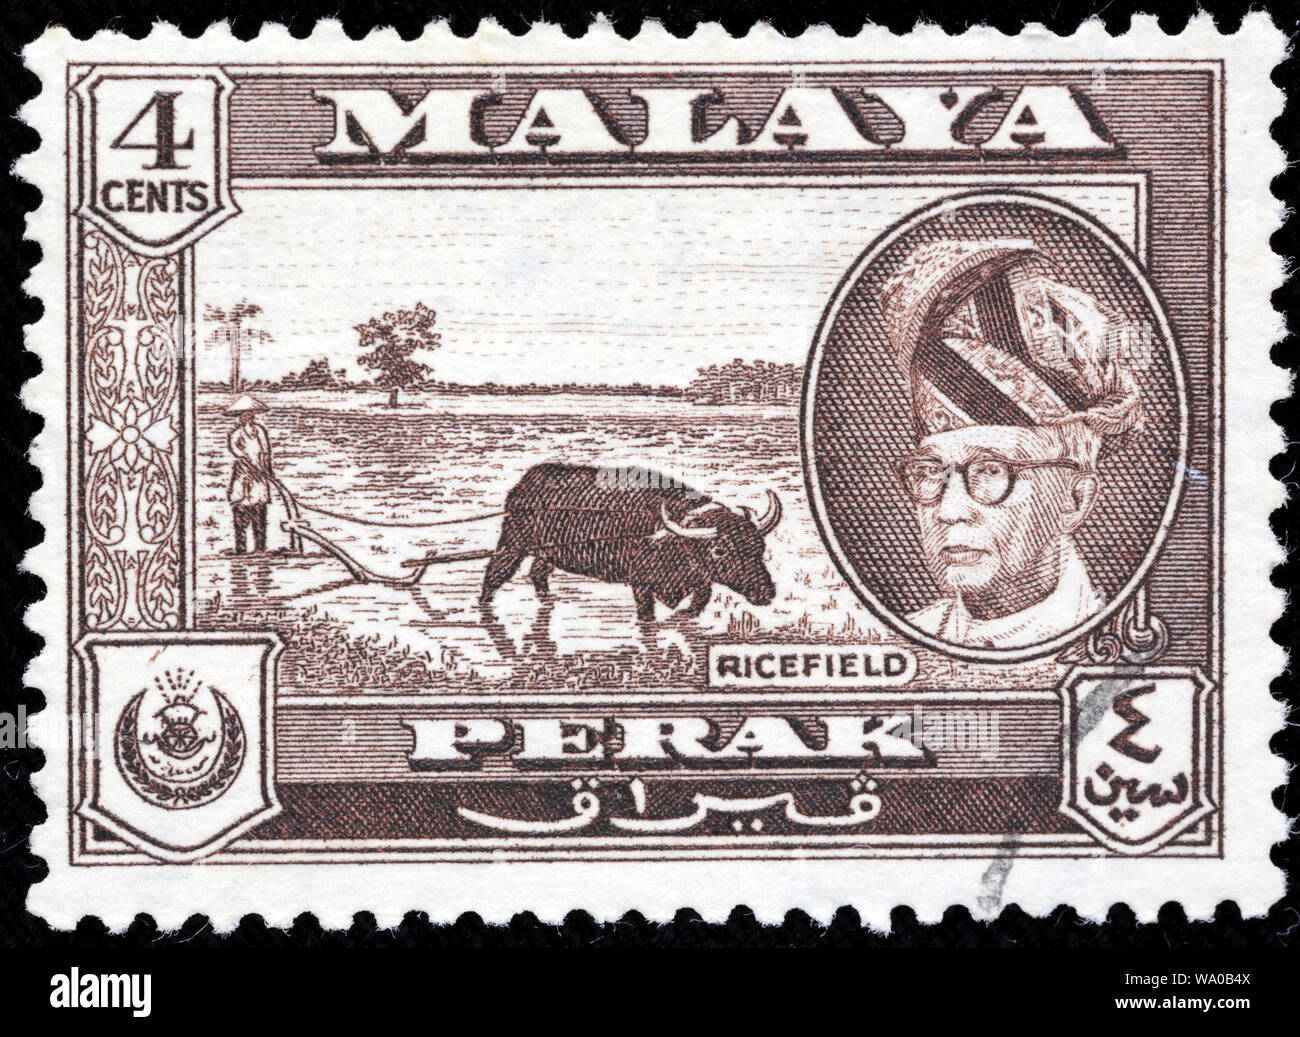 Ricefield, Yussuff Izzuddin Shah, timbre-poste, Malaisie, 1957 Banque D'Images